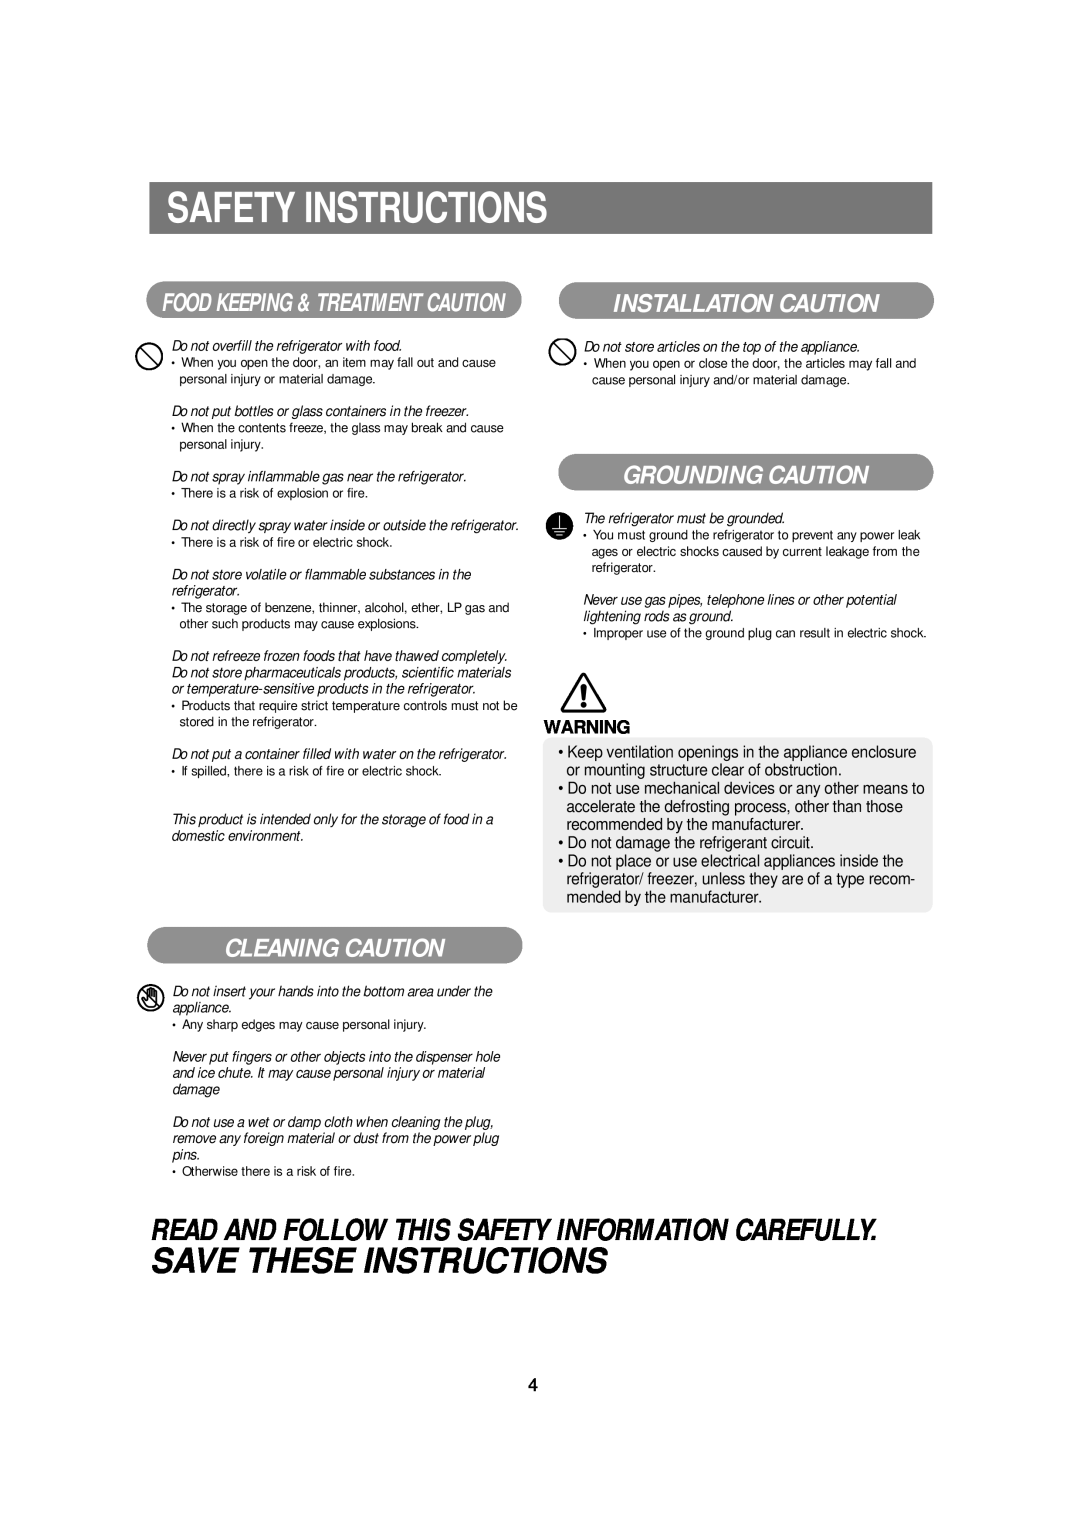 Samsung RSE8B Grounding Caution, Cleaning Caution, Safety Instructions, Save These Instructions, Installation Caution 